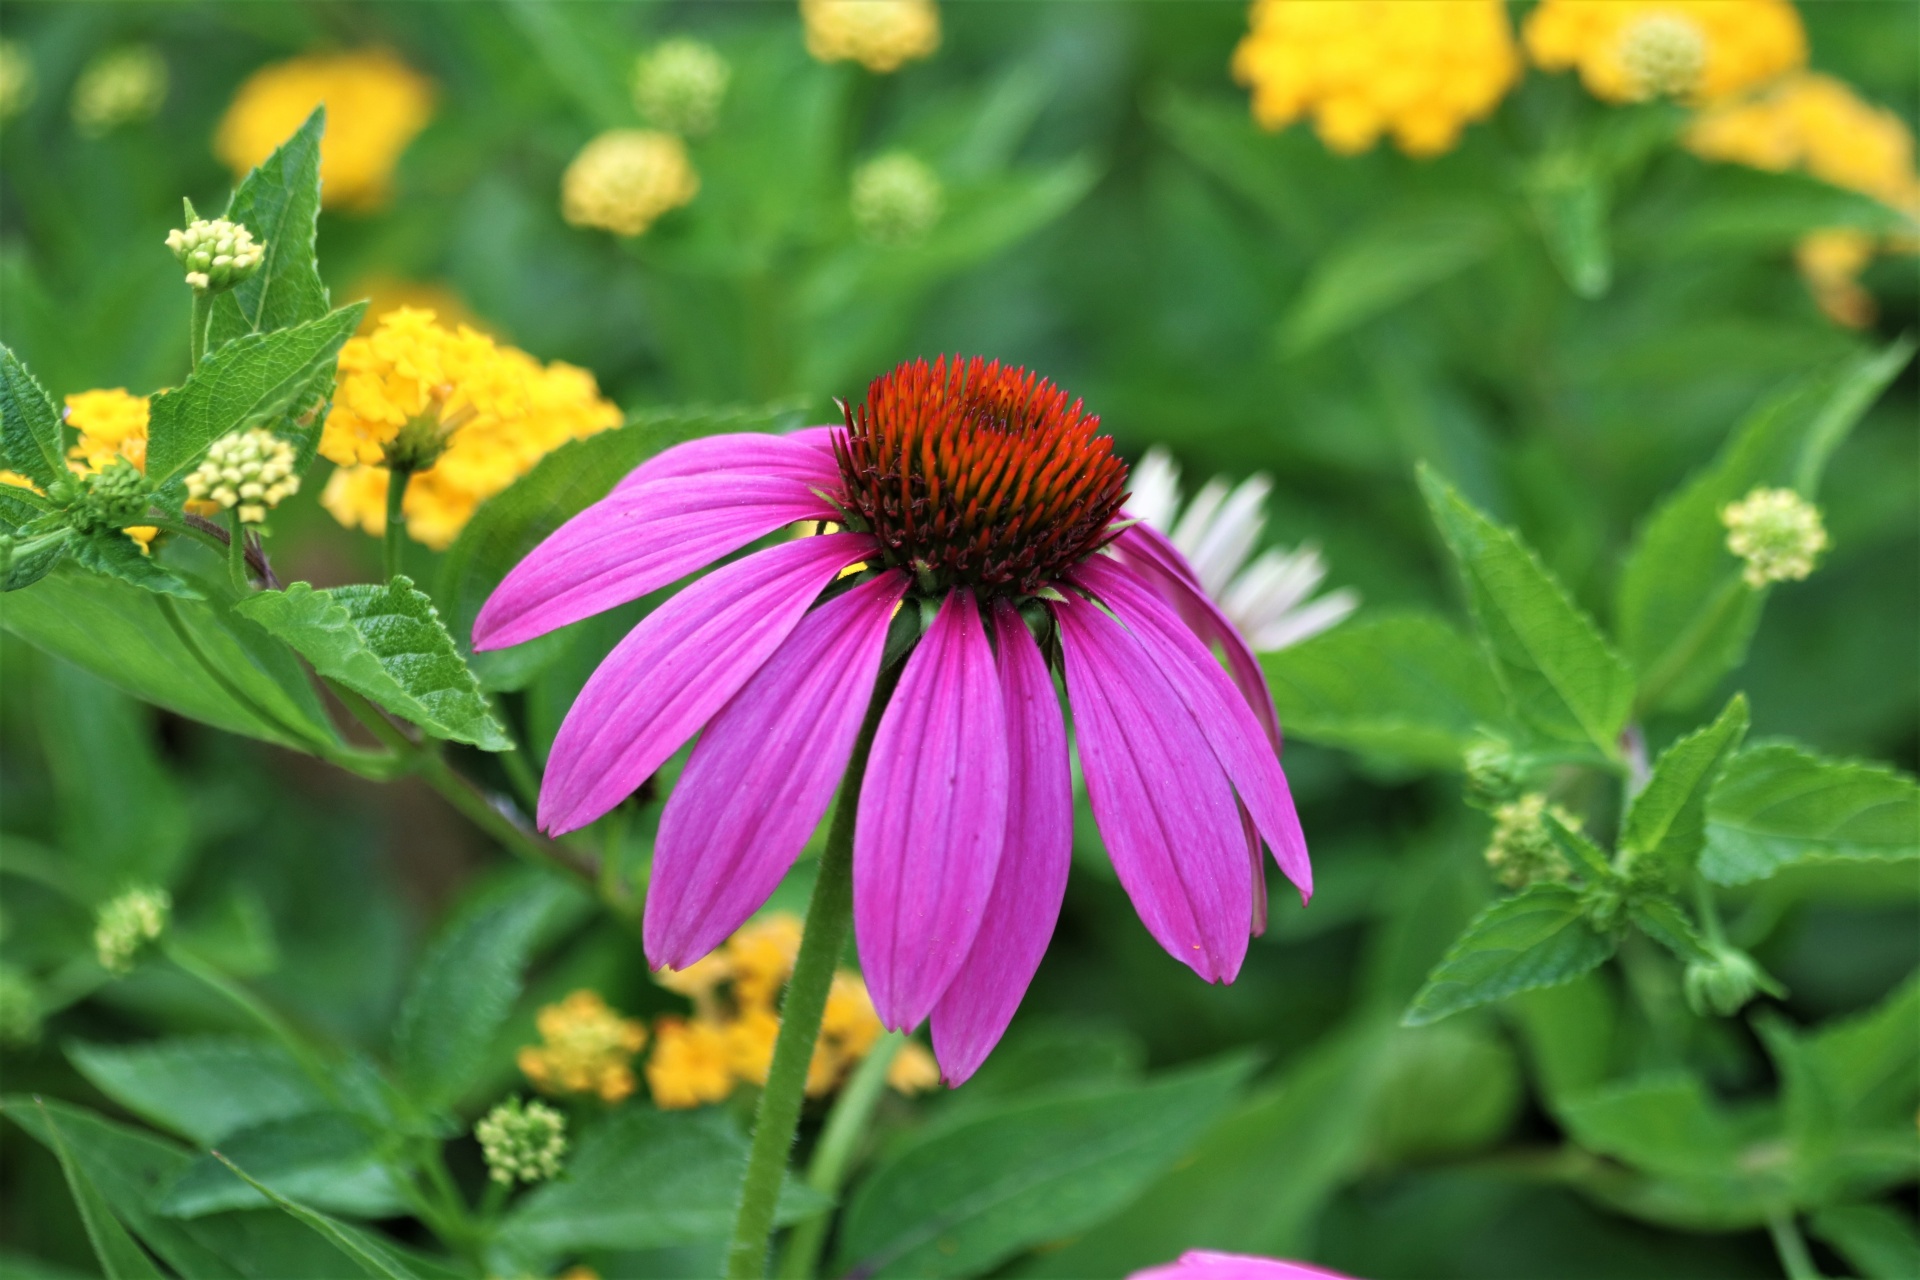 Close-up of a pink coneflower with green leaves and yellow lantana flowers in the background.